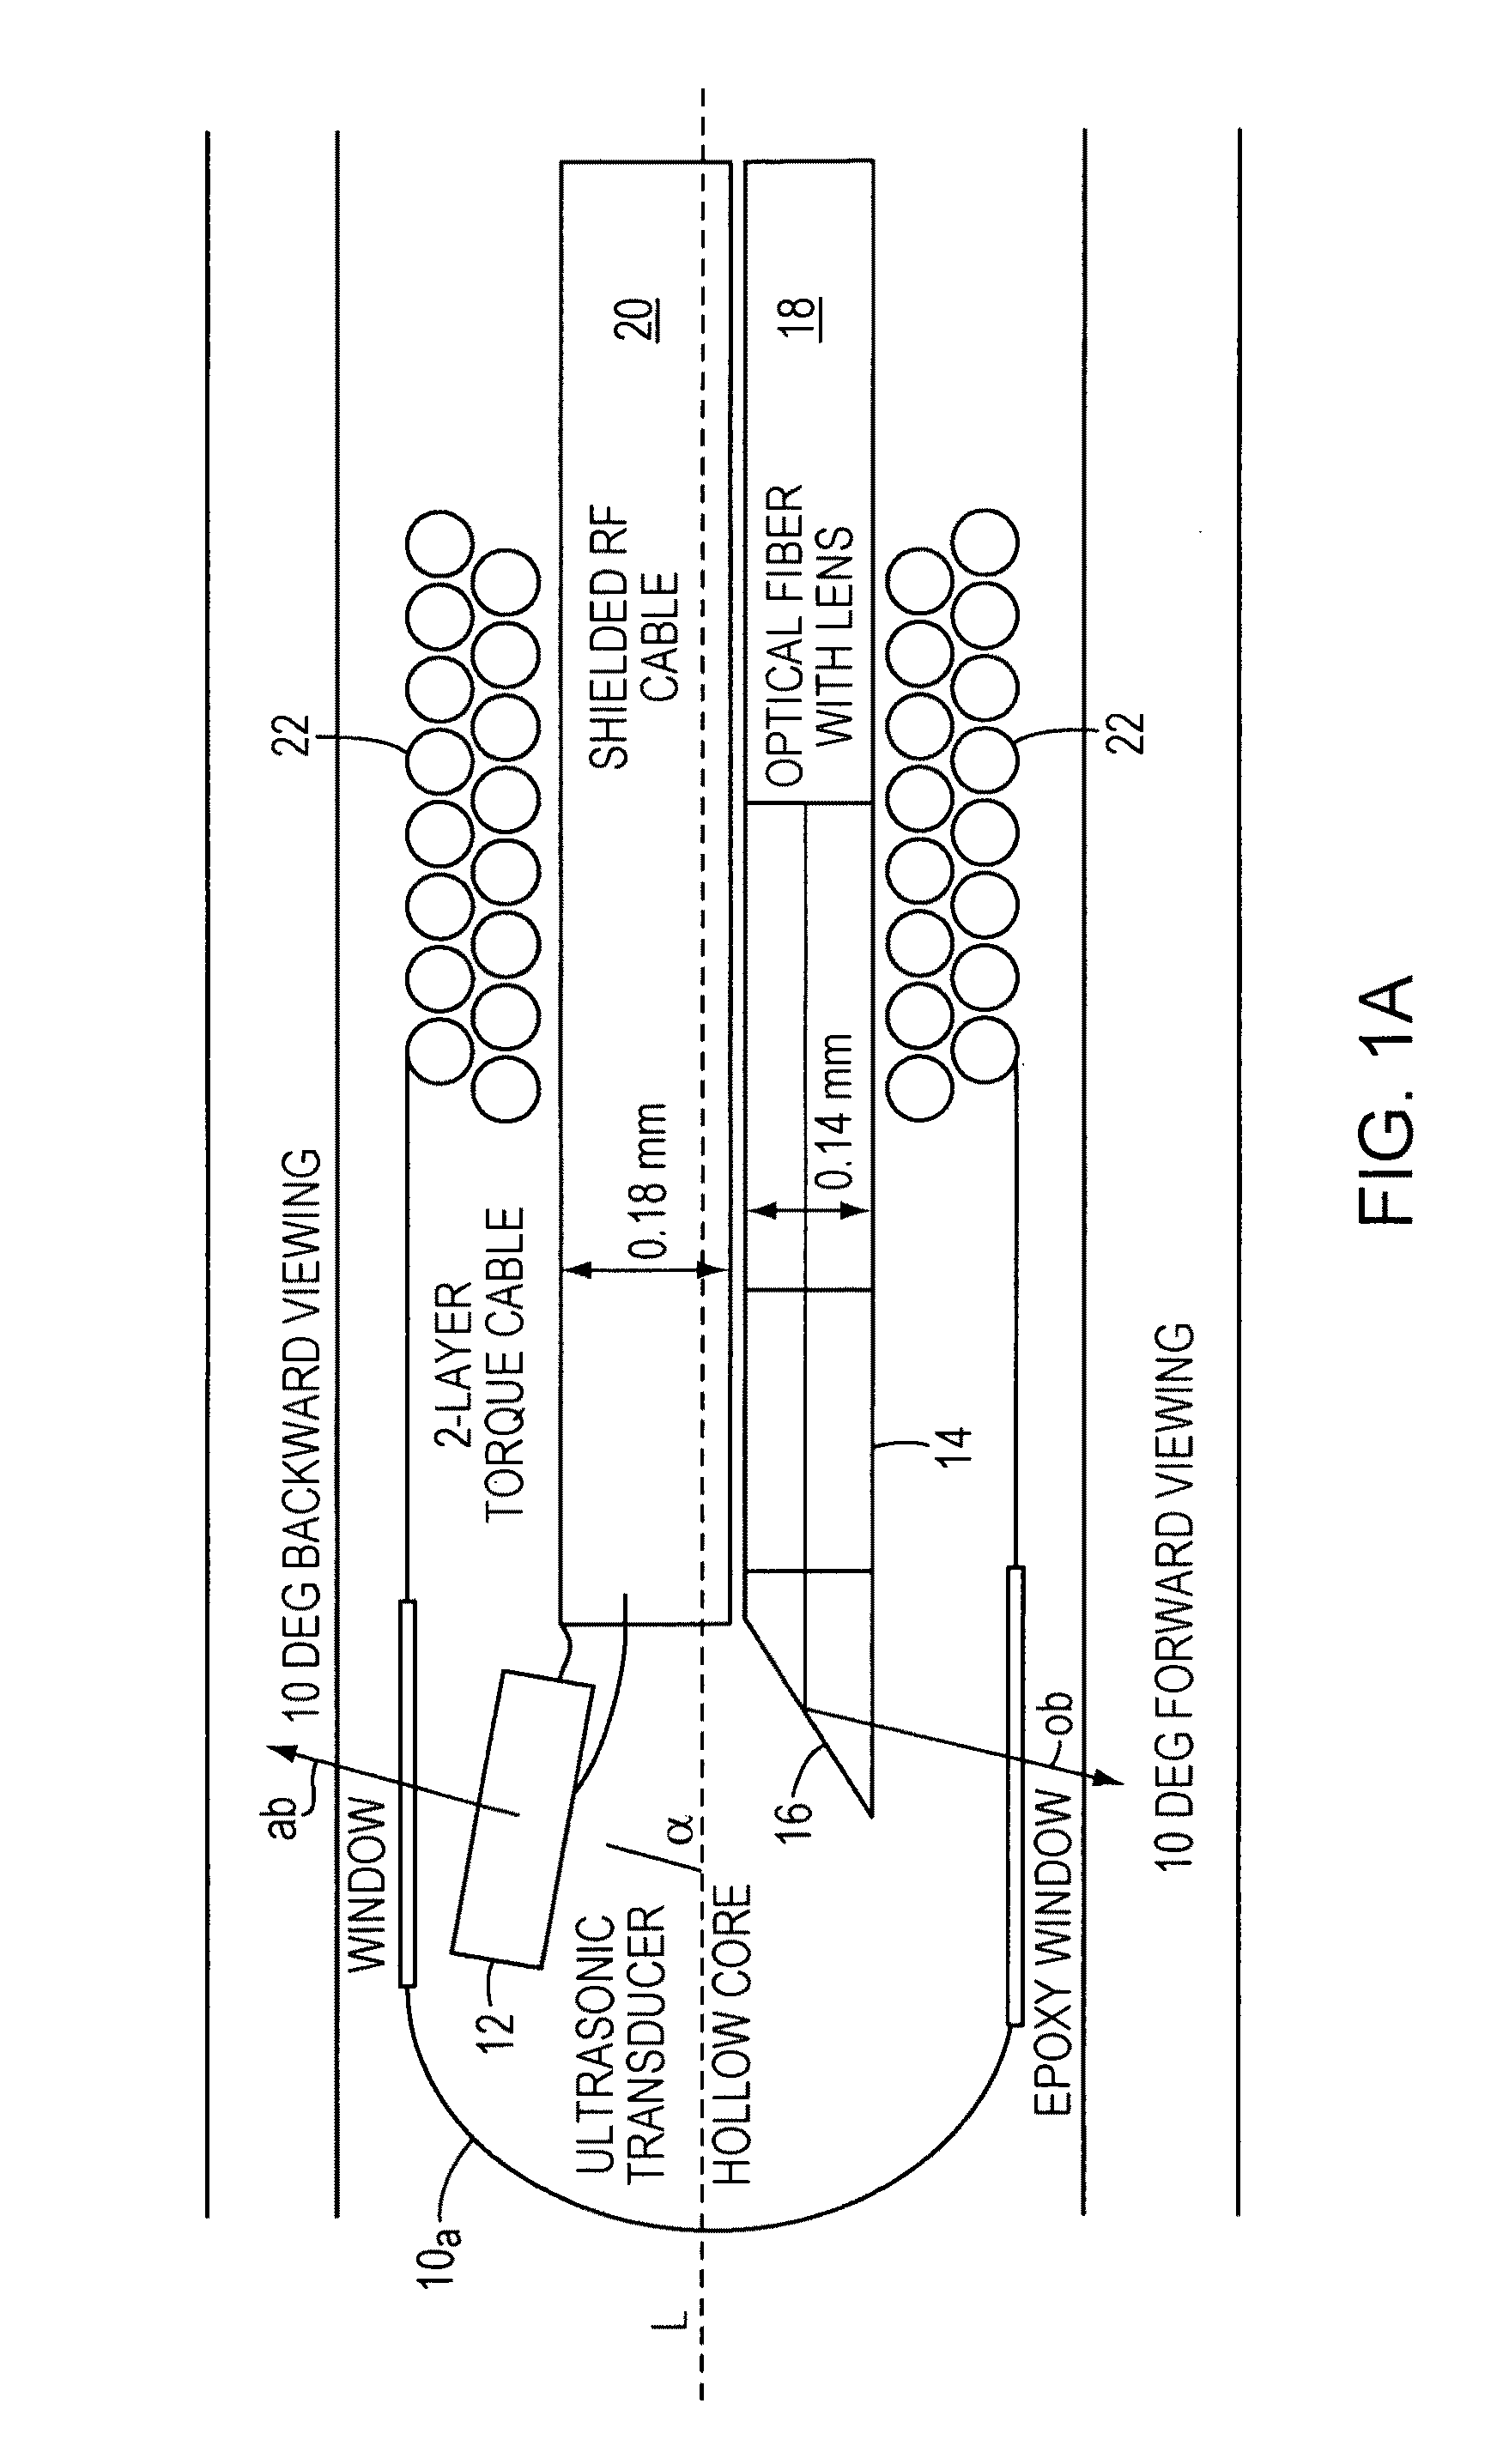 Opto-acoustic imaging devices and methods